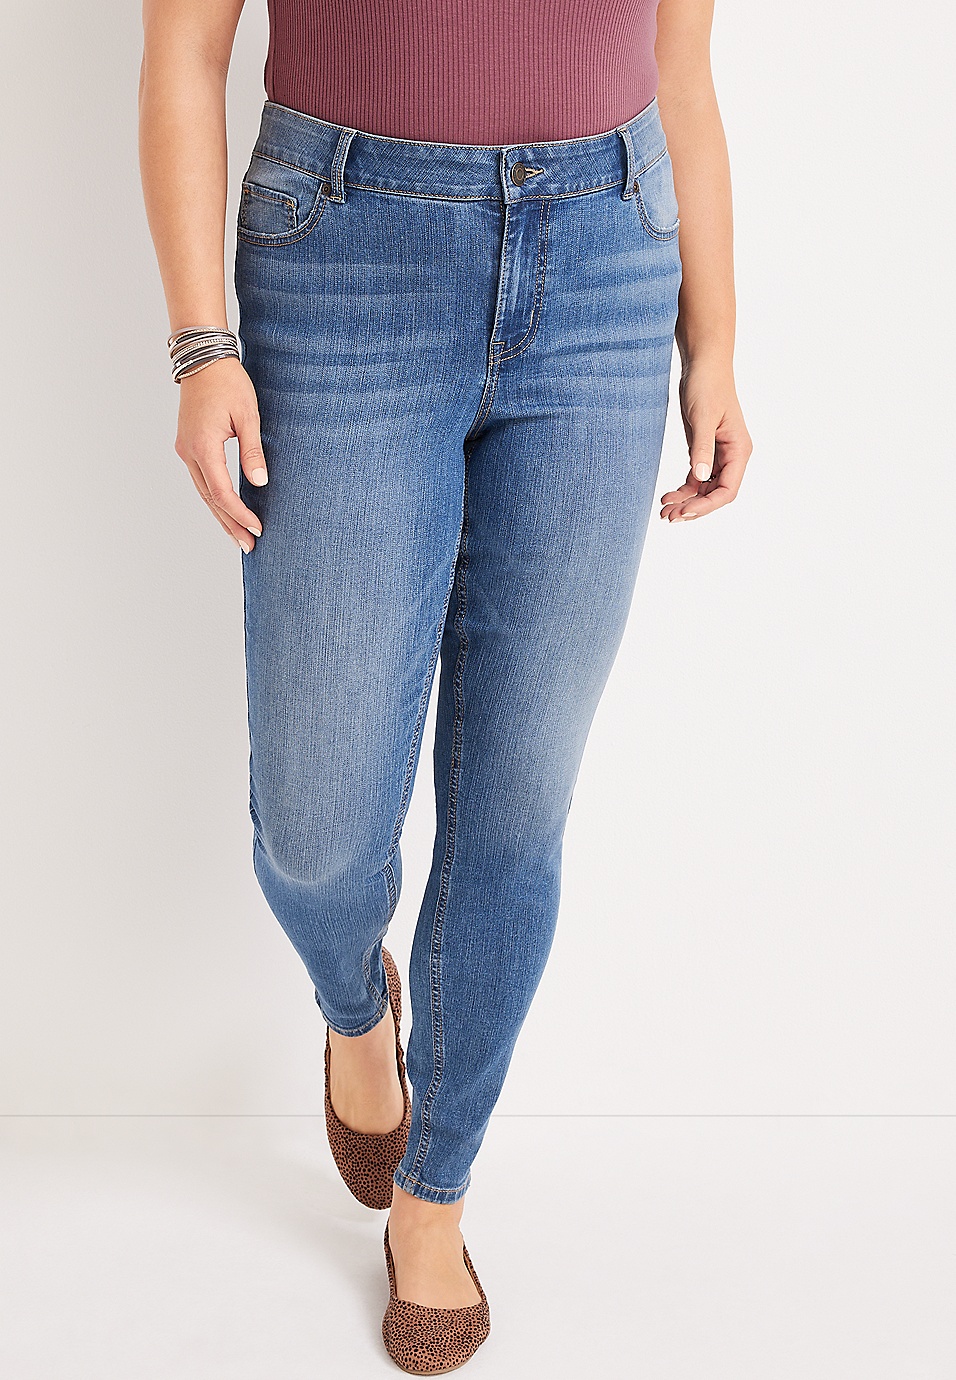 Plus Size m jeans by maurices™ Classic Skinny Mid Fit Mid Jean | maurices